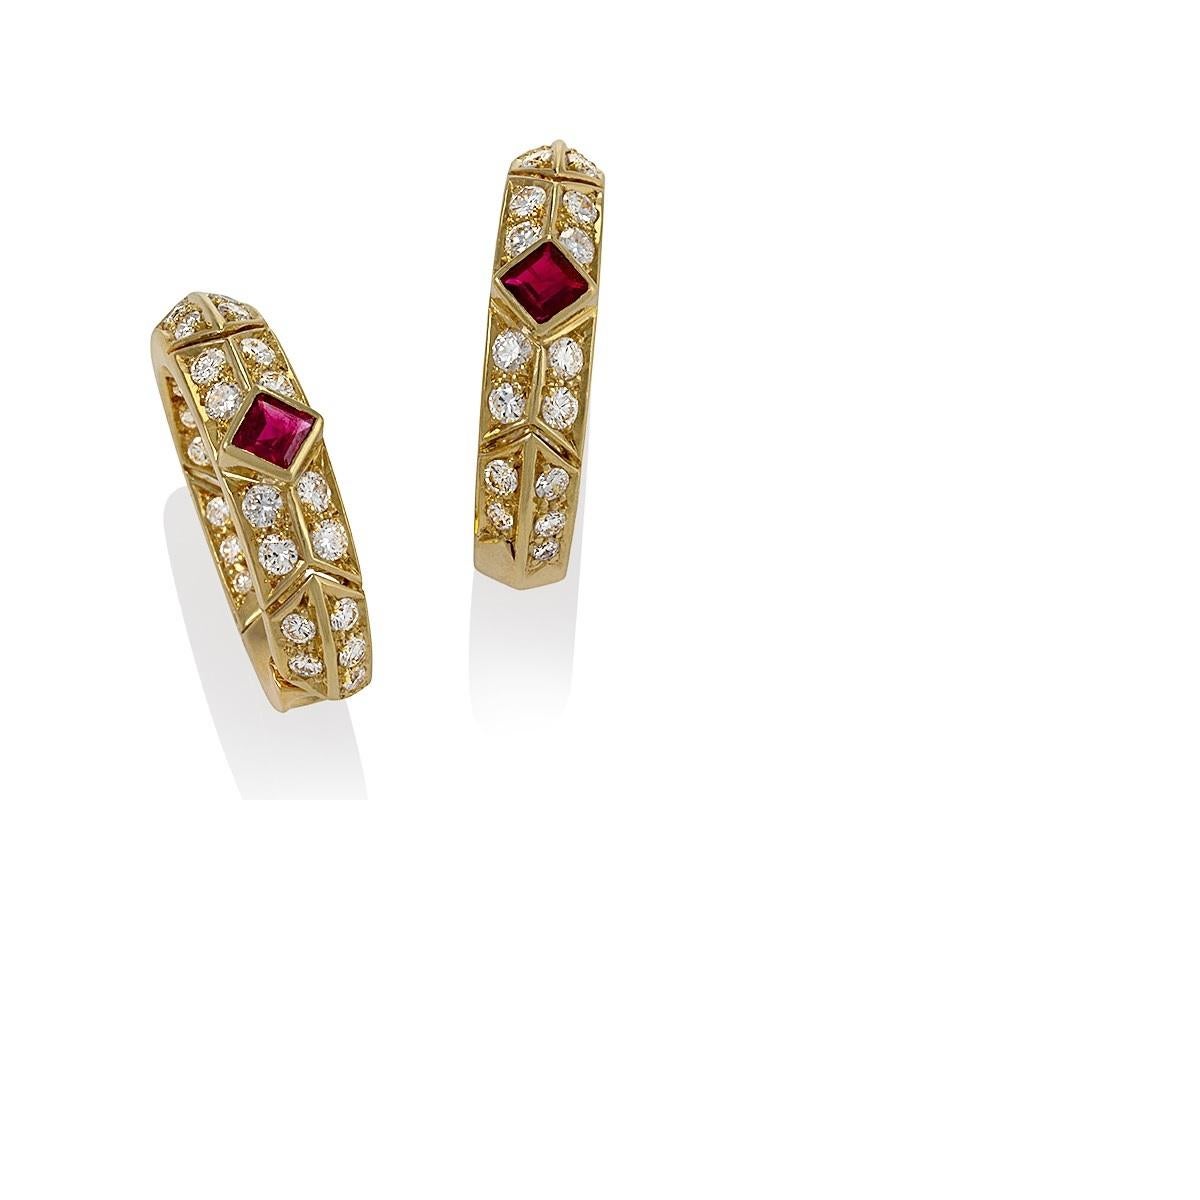 A pair of French 18 karat gold hoop earrings with rubies and diamonds by Van Cleef & Arpels. The hoop earrings have 2 square cut rubes with an approximate total weight of .80 carats, and 60 round cut diamonds with an approximate total weight of 1.40